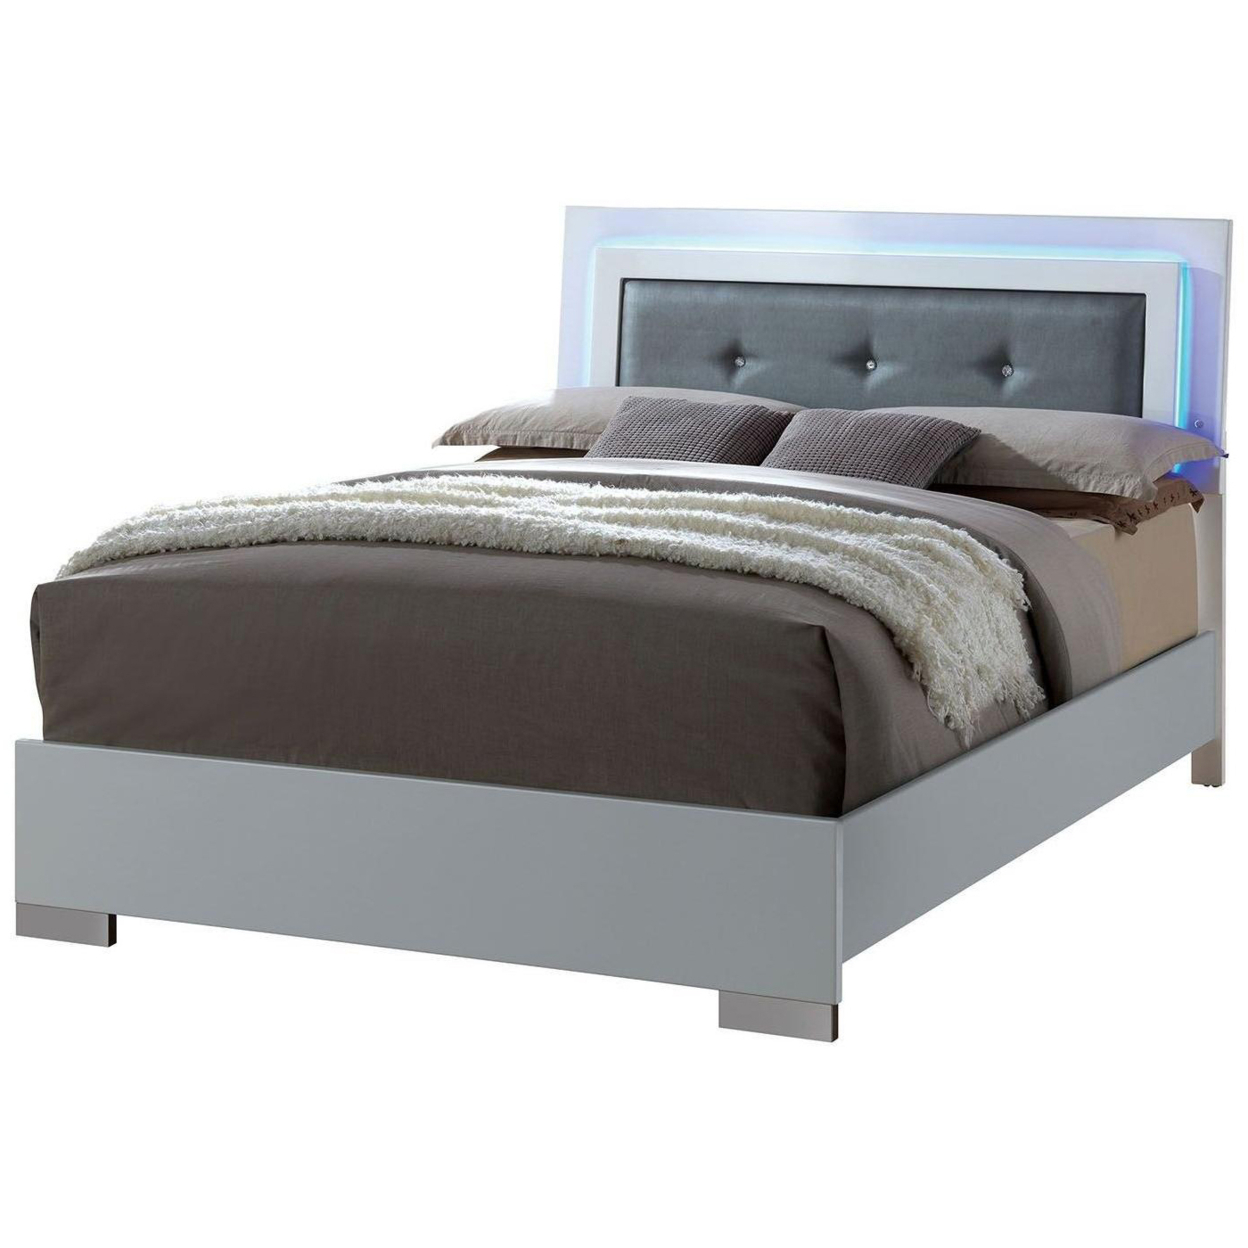 Wooden Queen Bed With Leatherette Headboard And LED Trims, White And Black- Saltoro Sherpi